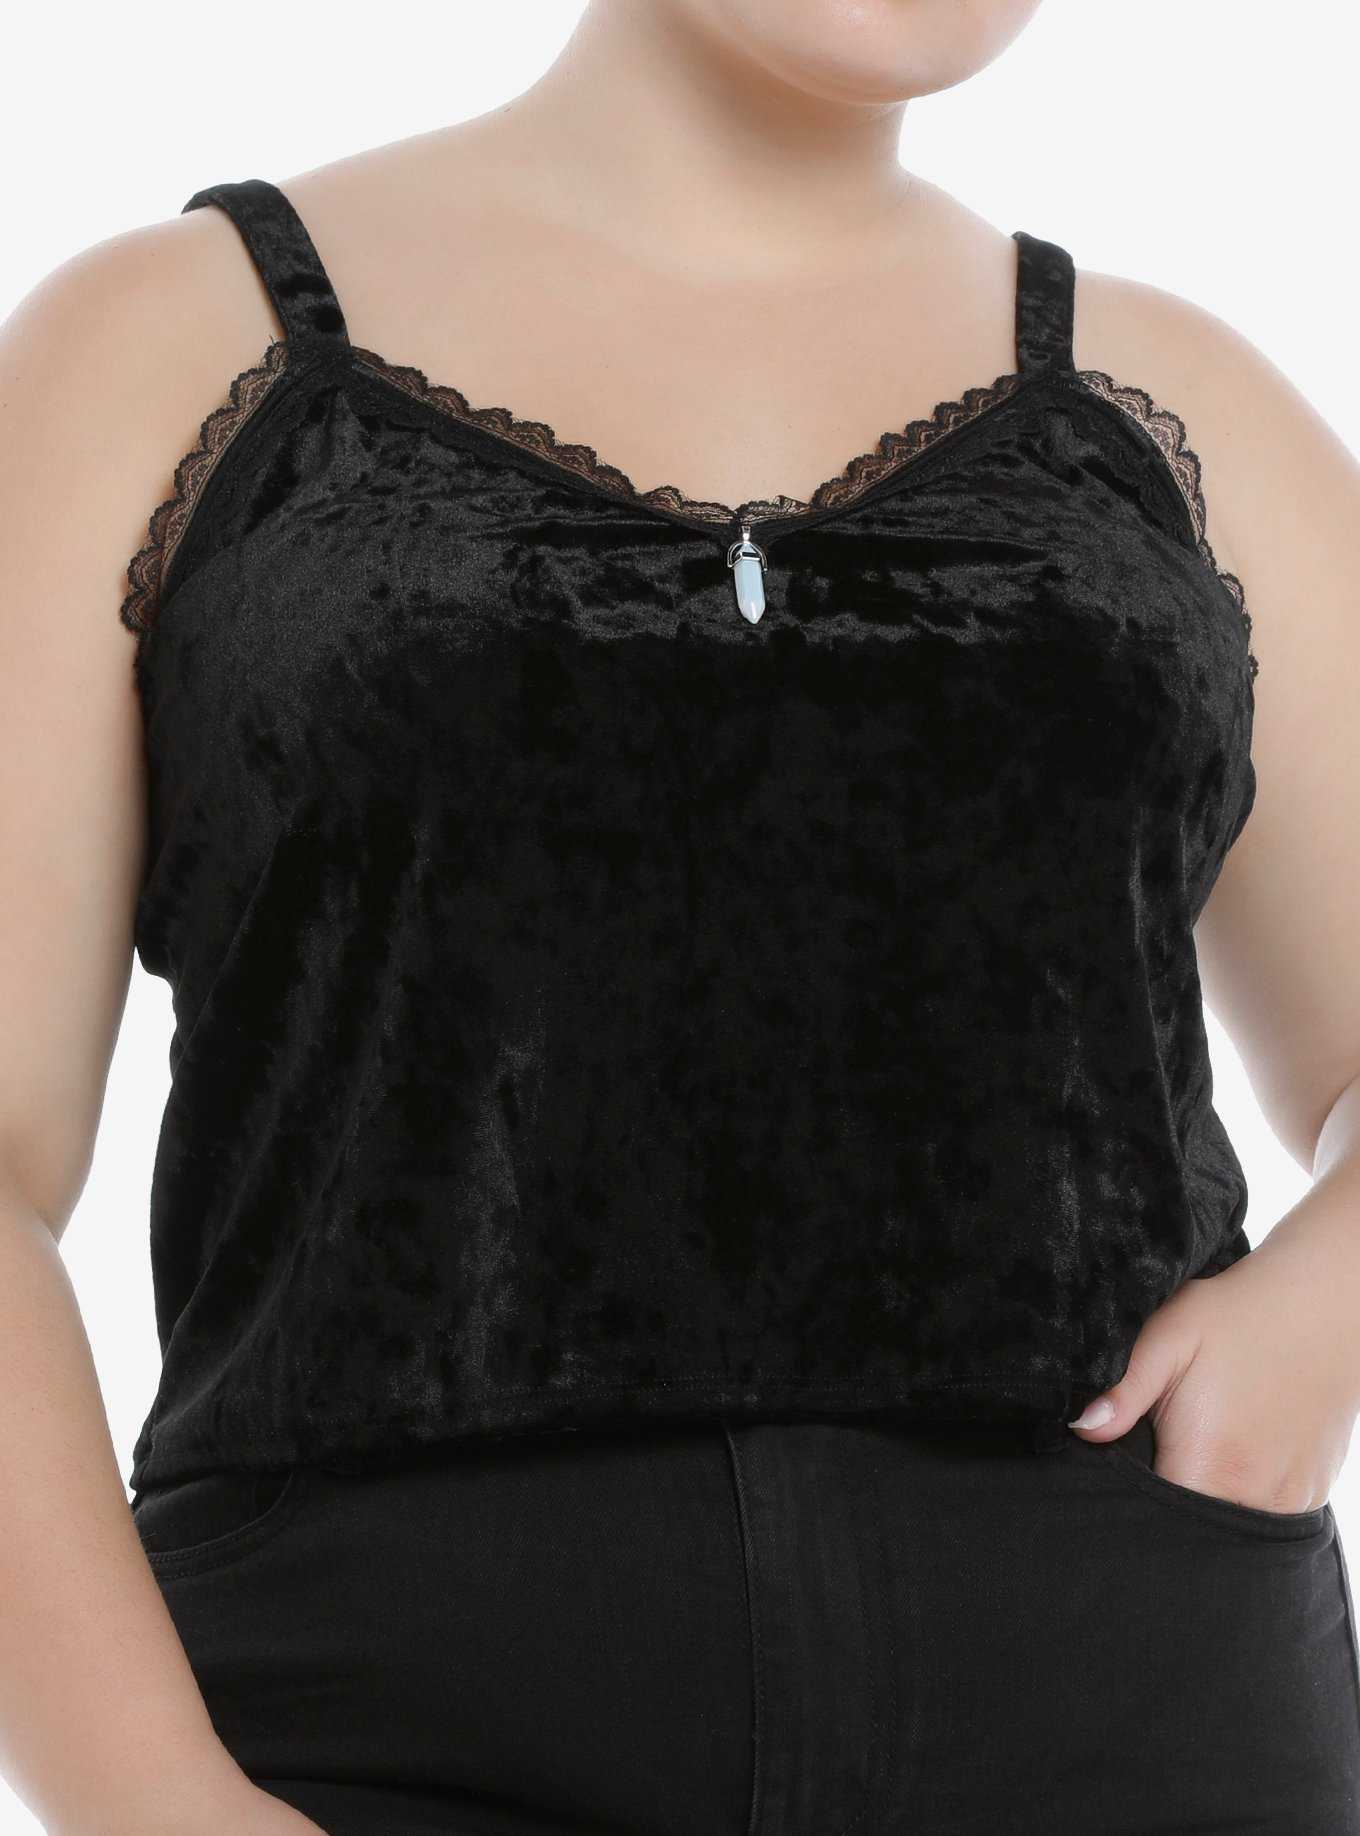 Crushed Velvet & Crystal Charm Girls Strappy Crop Tank Top Plus Size, , hi-res